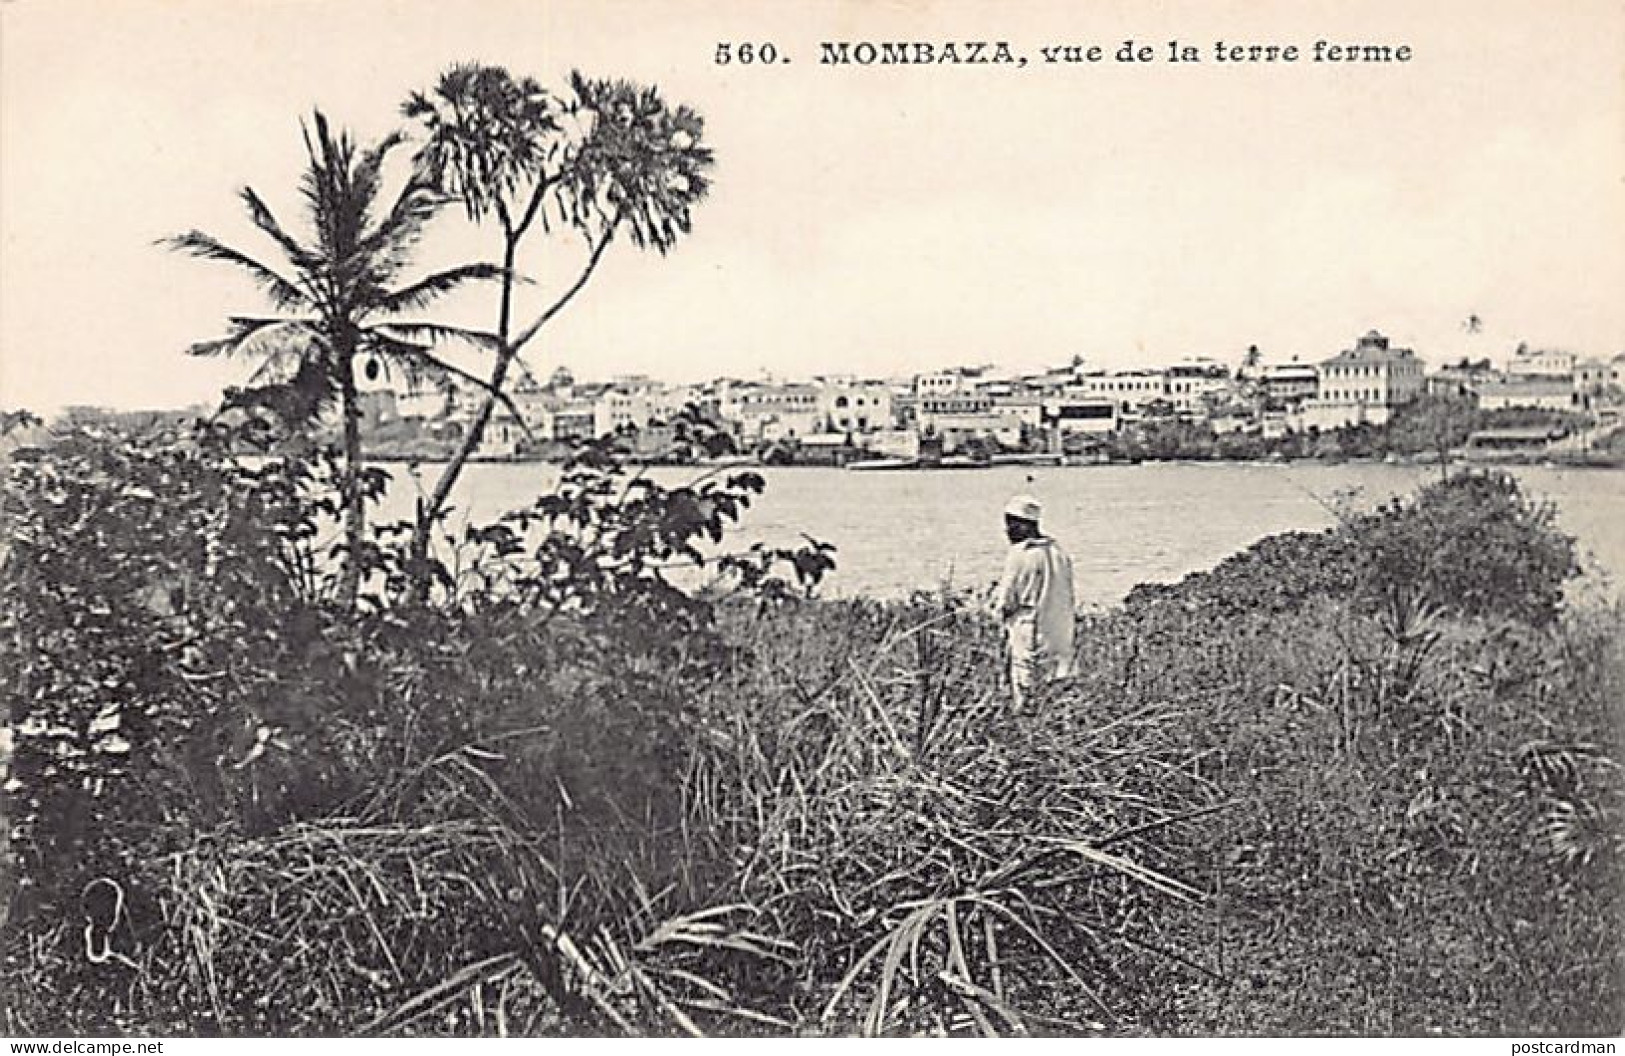 Kenya - MOMBASA - View From The Land - Publ. Messageries Maritimes 560 - Kenia